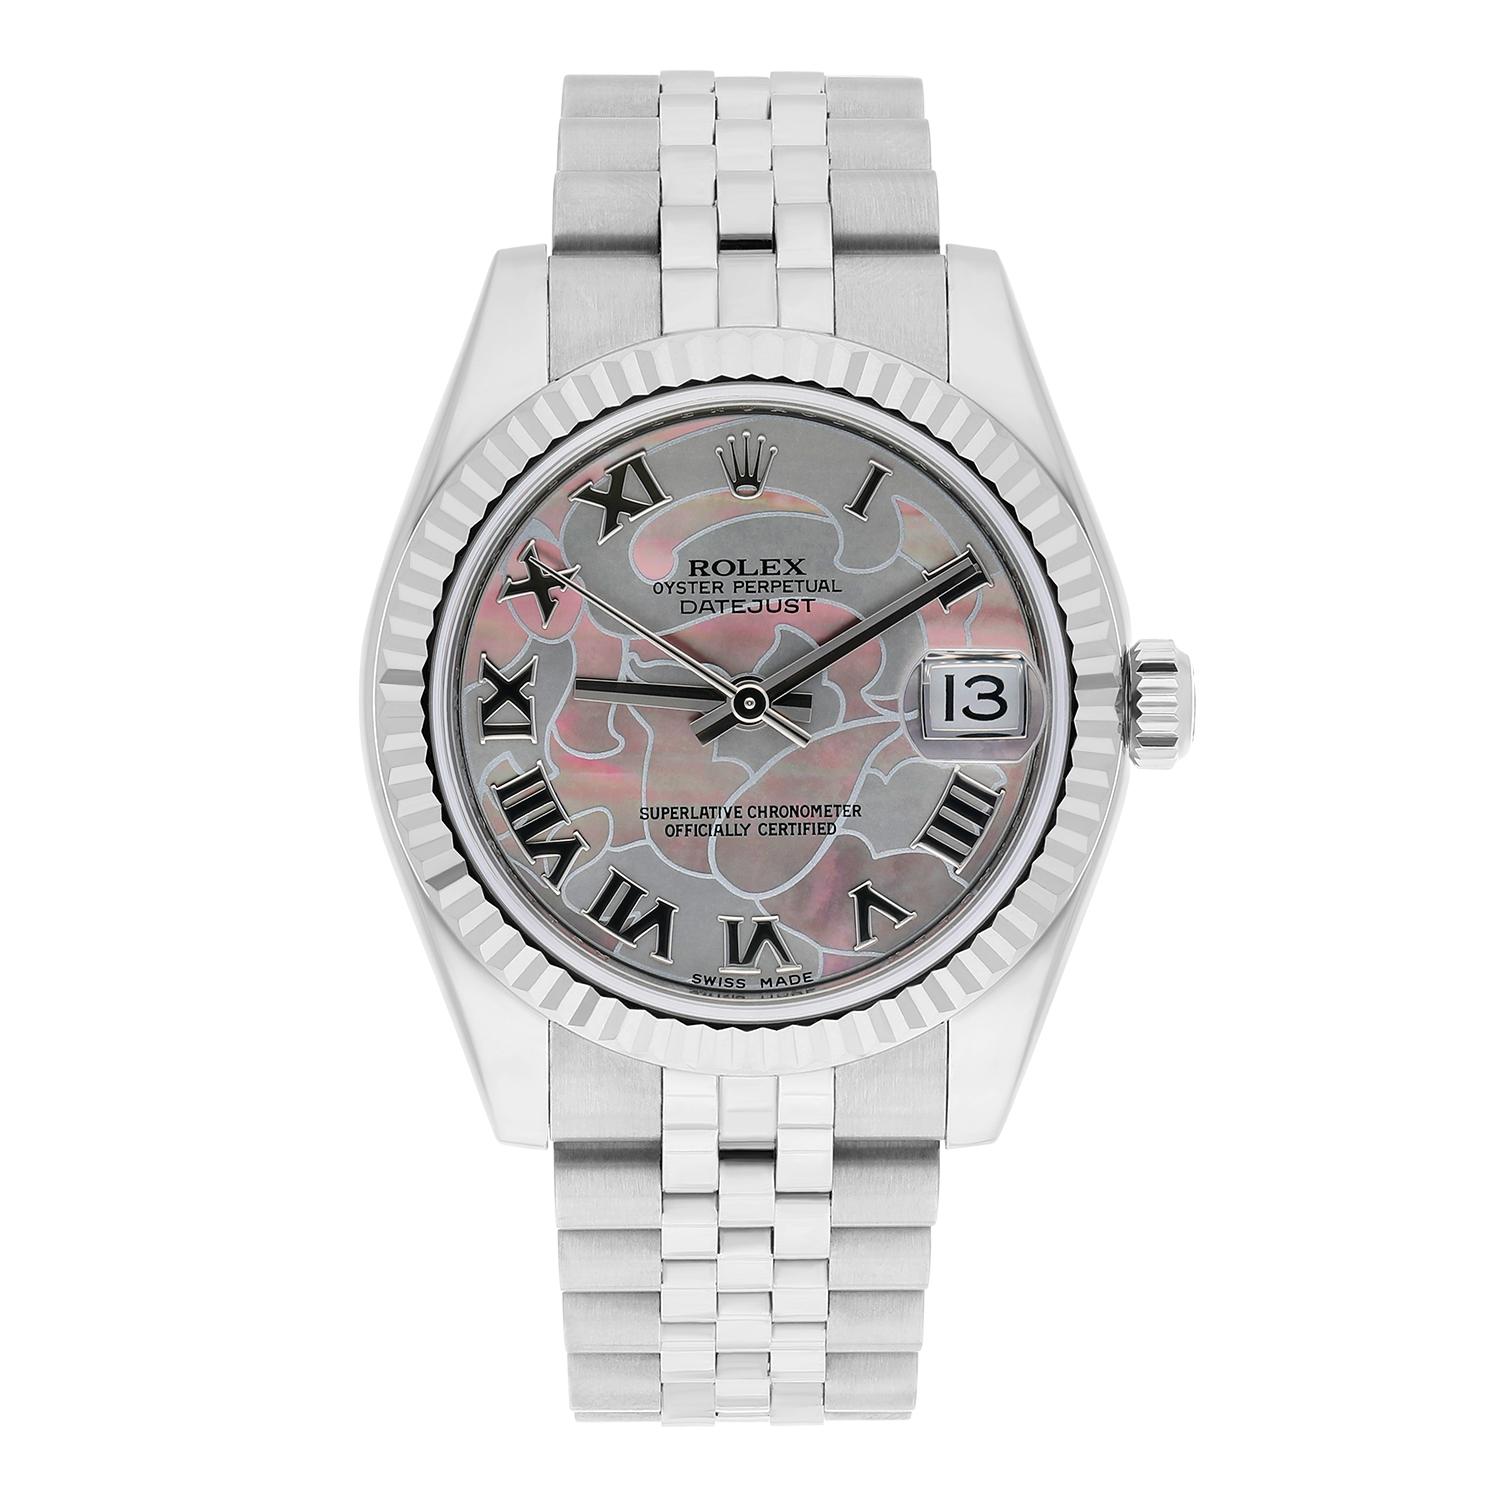 The Rolex Datejust 31 178274 collection of women's fine watches are designed with a solid 18k white gold fluted bezel that is set on an Oystersteel stainless steel case with either a jubilee bracelet or oyster bracelet. The iconic cyclops lens over